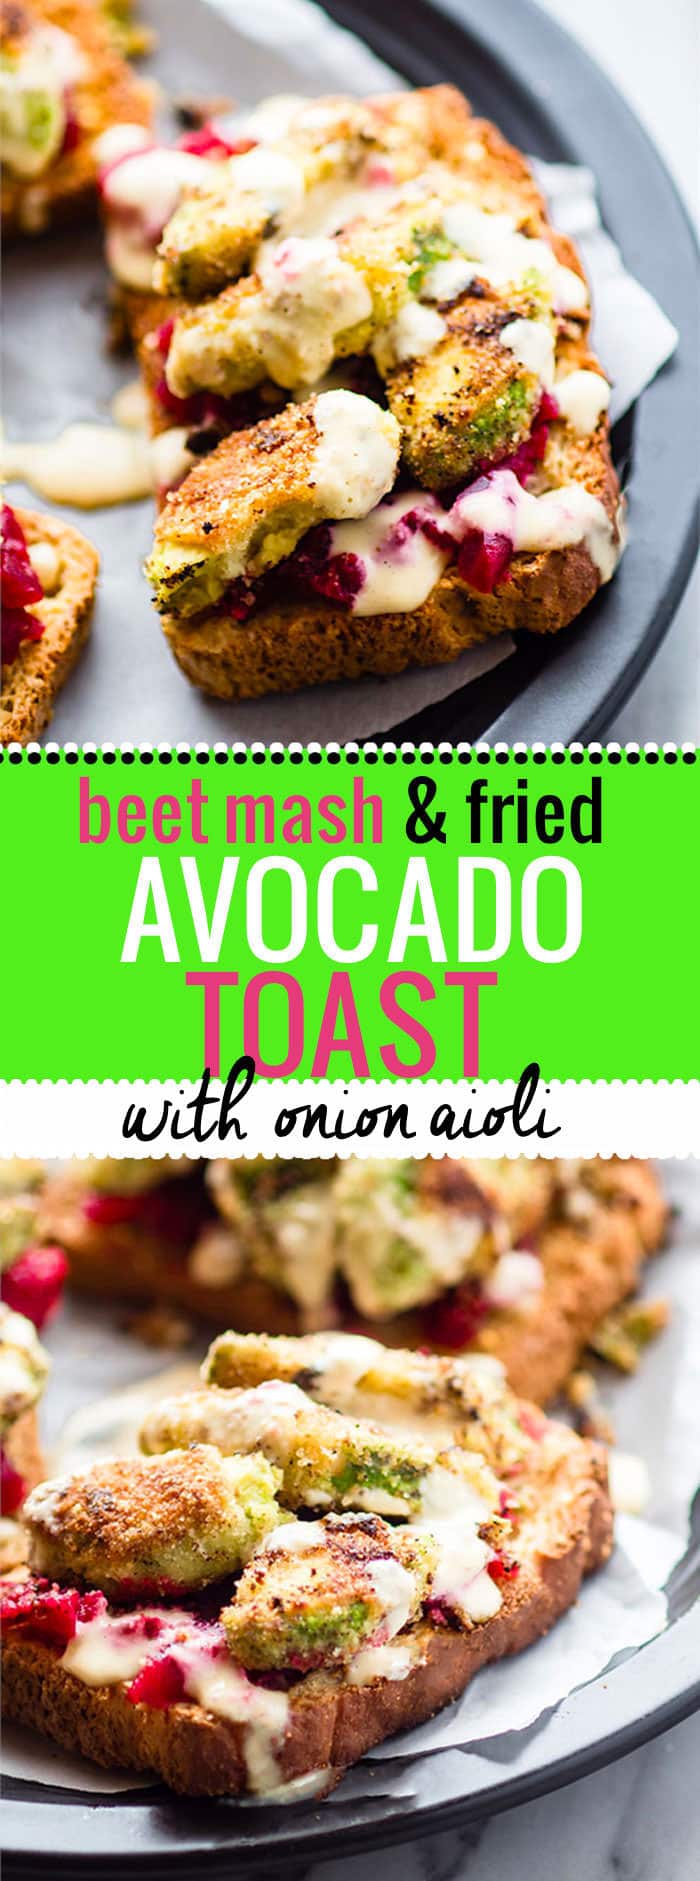 Healthy AVOCADO TOAST that's crave worthy! Smashed beet and gluten free fried avocado toast with onion aioli. Crispy buttery Breakfast in 20 minutes. Crispy, buttery, flavor packed! @cottercrunch